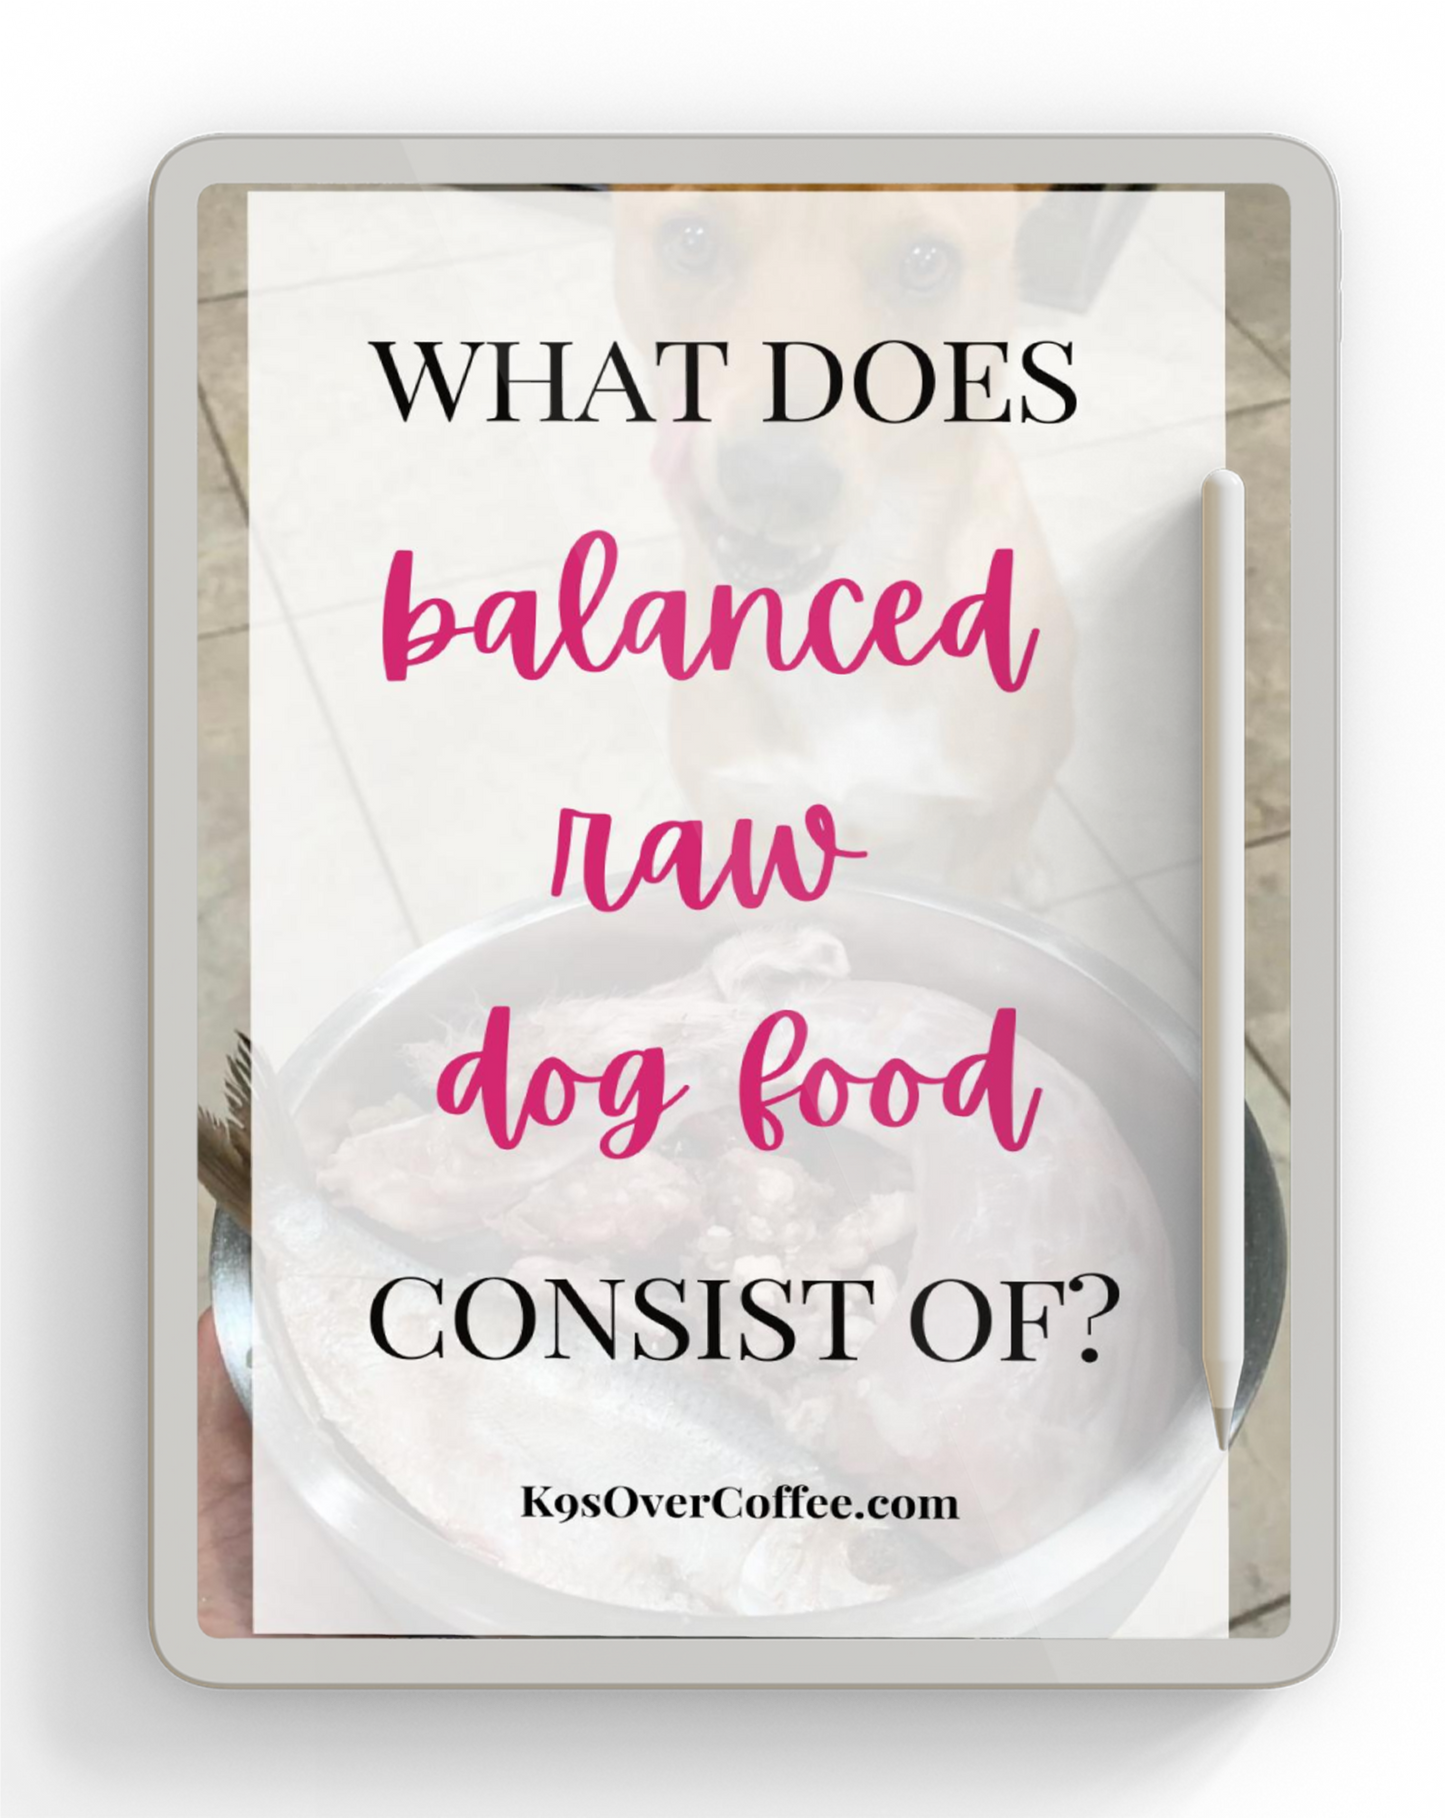 Ebook about the different raw dog food ingredients in balanced homemade raw dog food